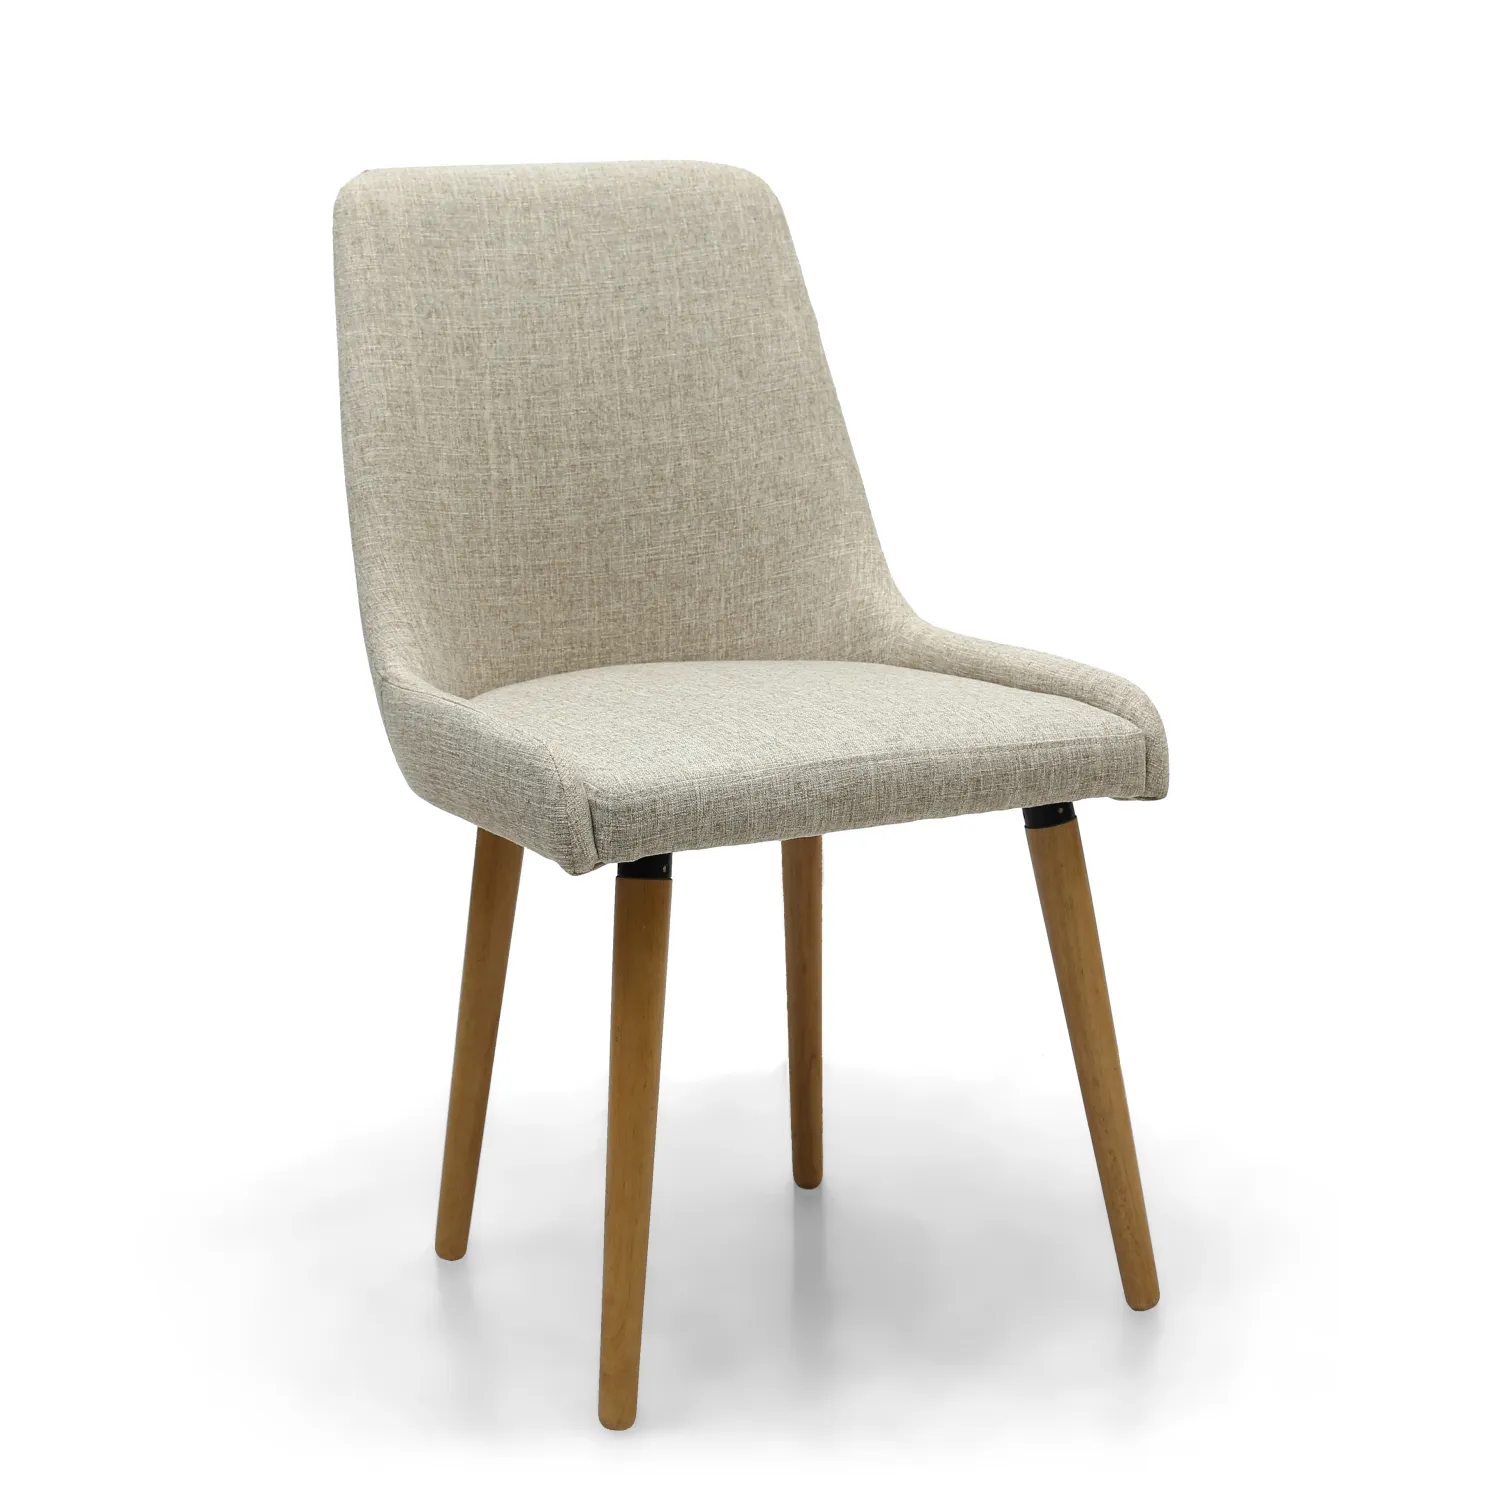 Natural Beige Linen Fabric Dining Chair